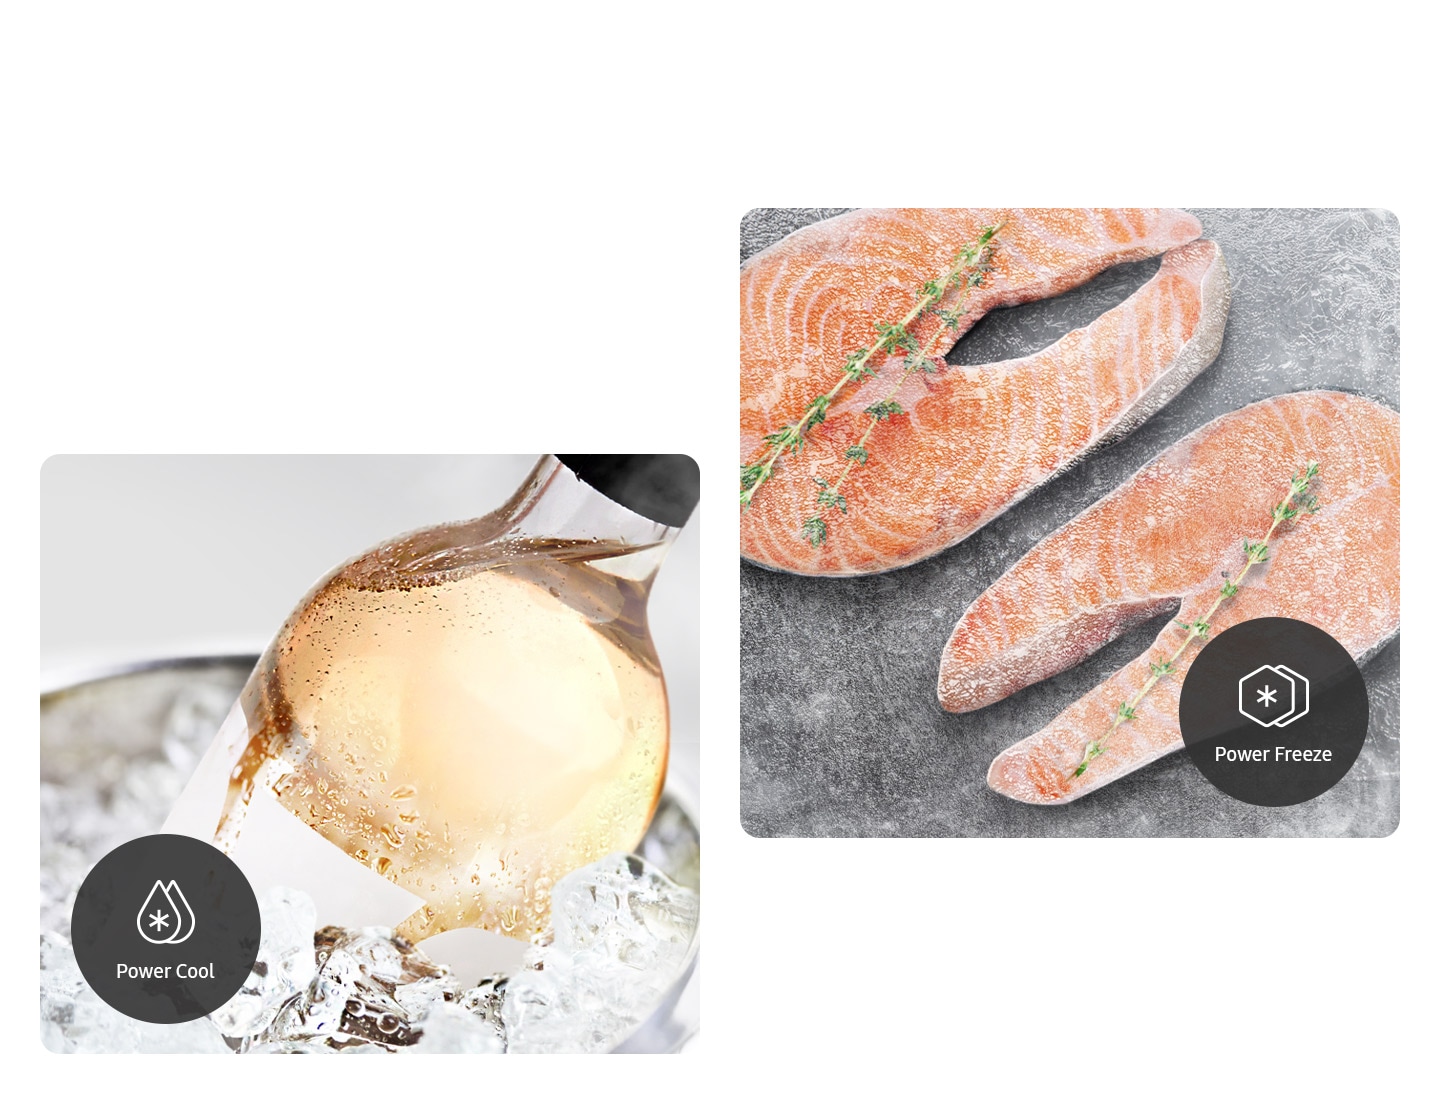 A bottle of wine is being chilled fast with Power Cool. 2 salmon steaks are being frozen fast with Power Freeze.